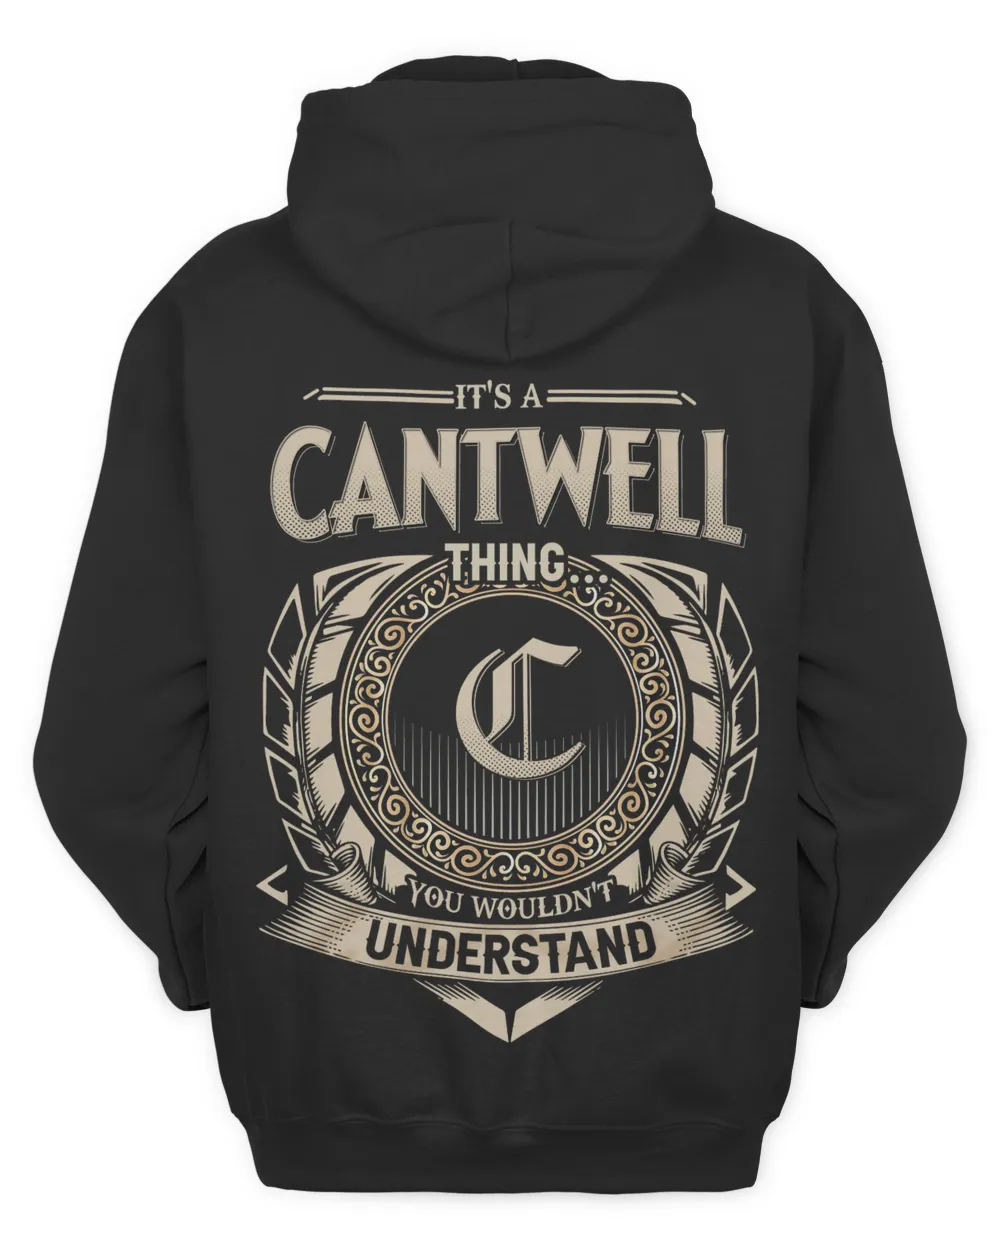 CANTWELL